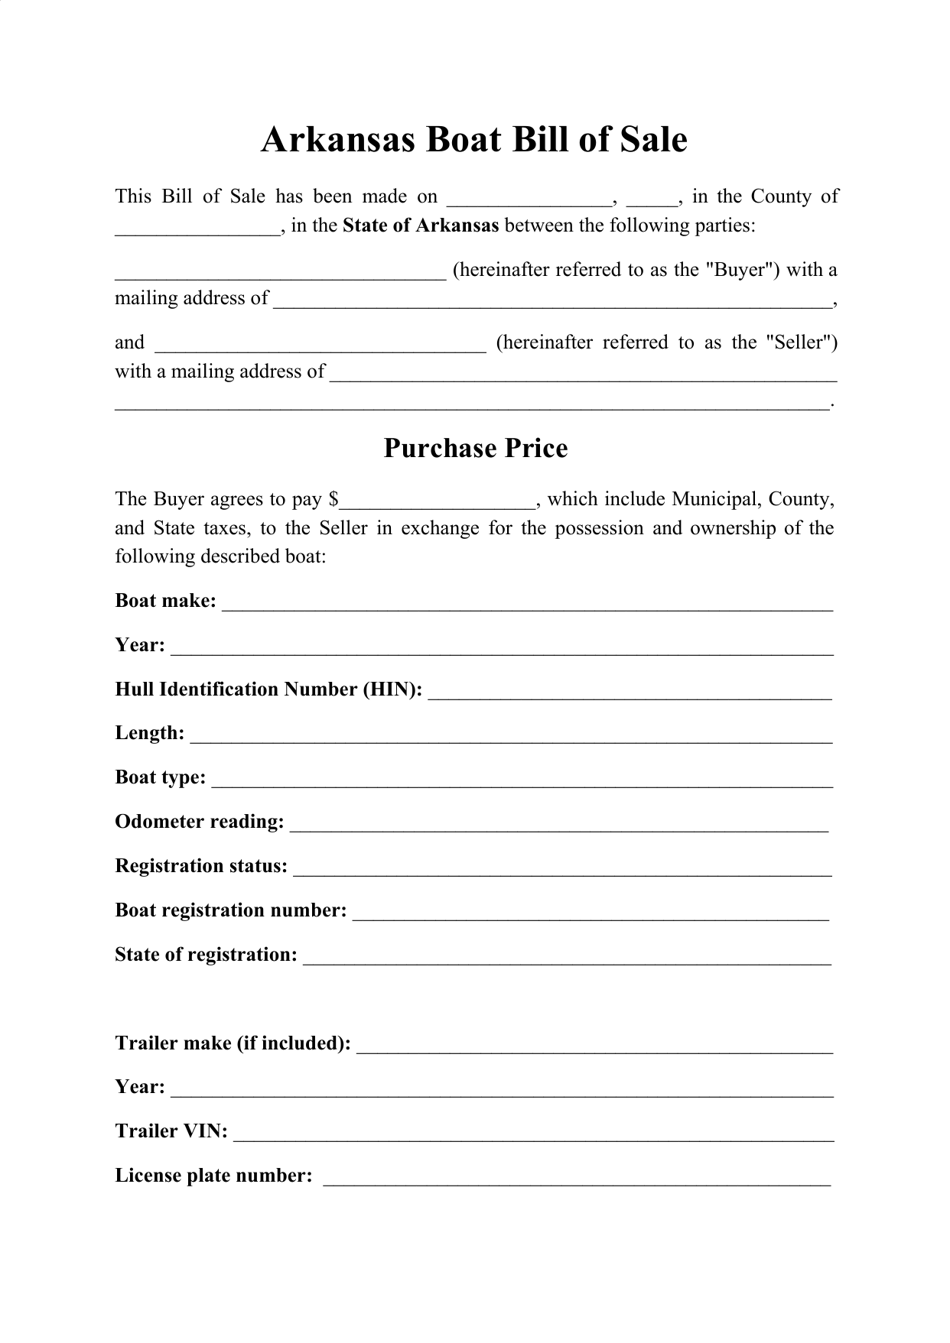 Boat Bill of Sale Form - Arkansas, Page 1